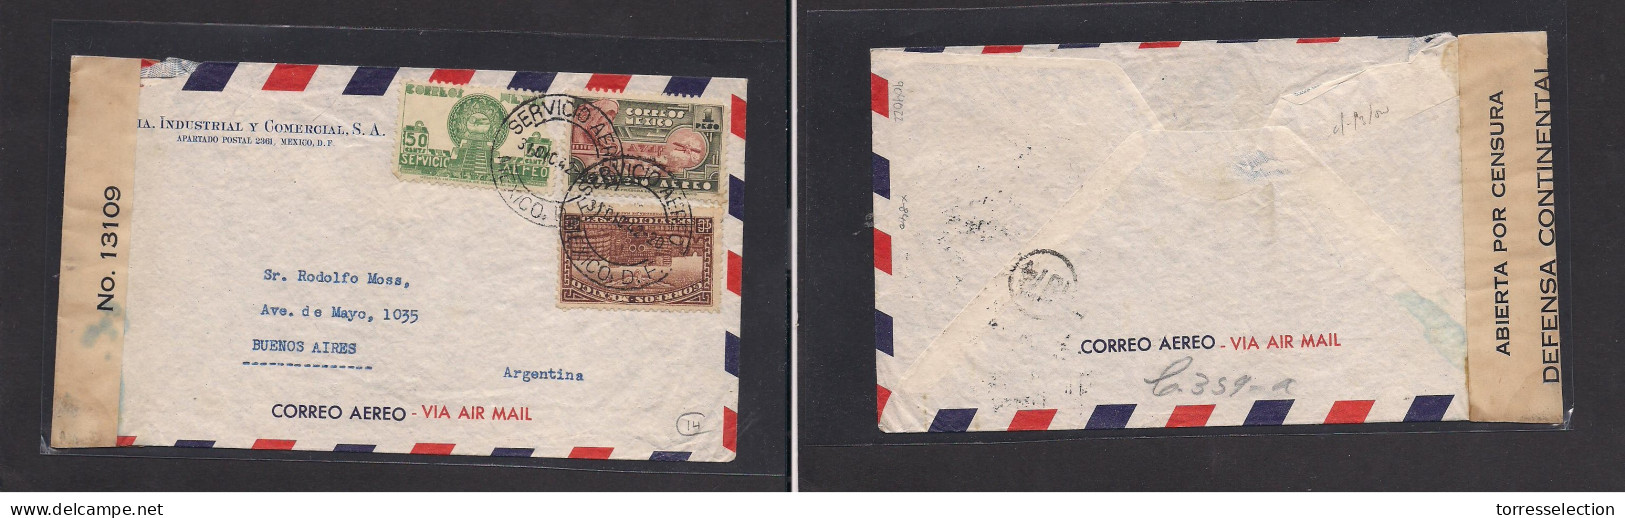 MEXICO. Mexico - Cover - 1942 DF To Argentina Air Mult Fkd Env+censored. Easy Deal. XSALE. - Mexico